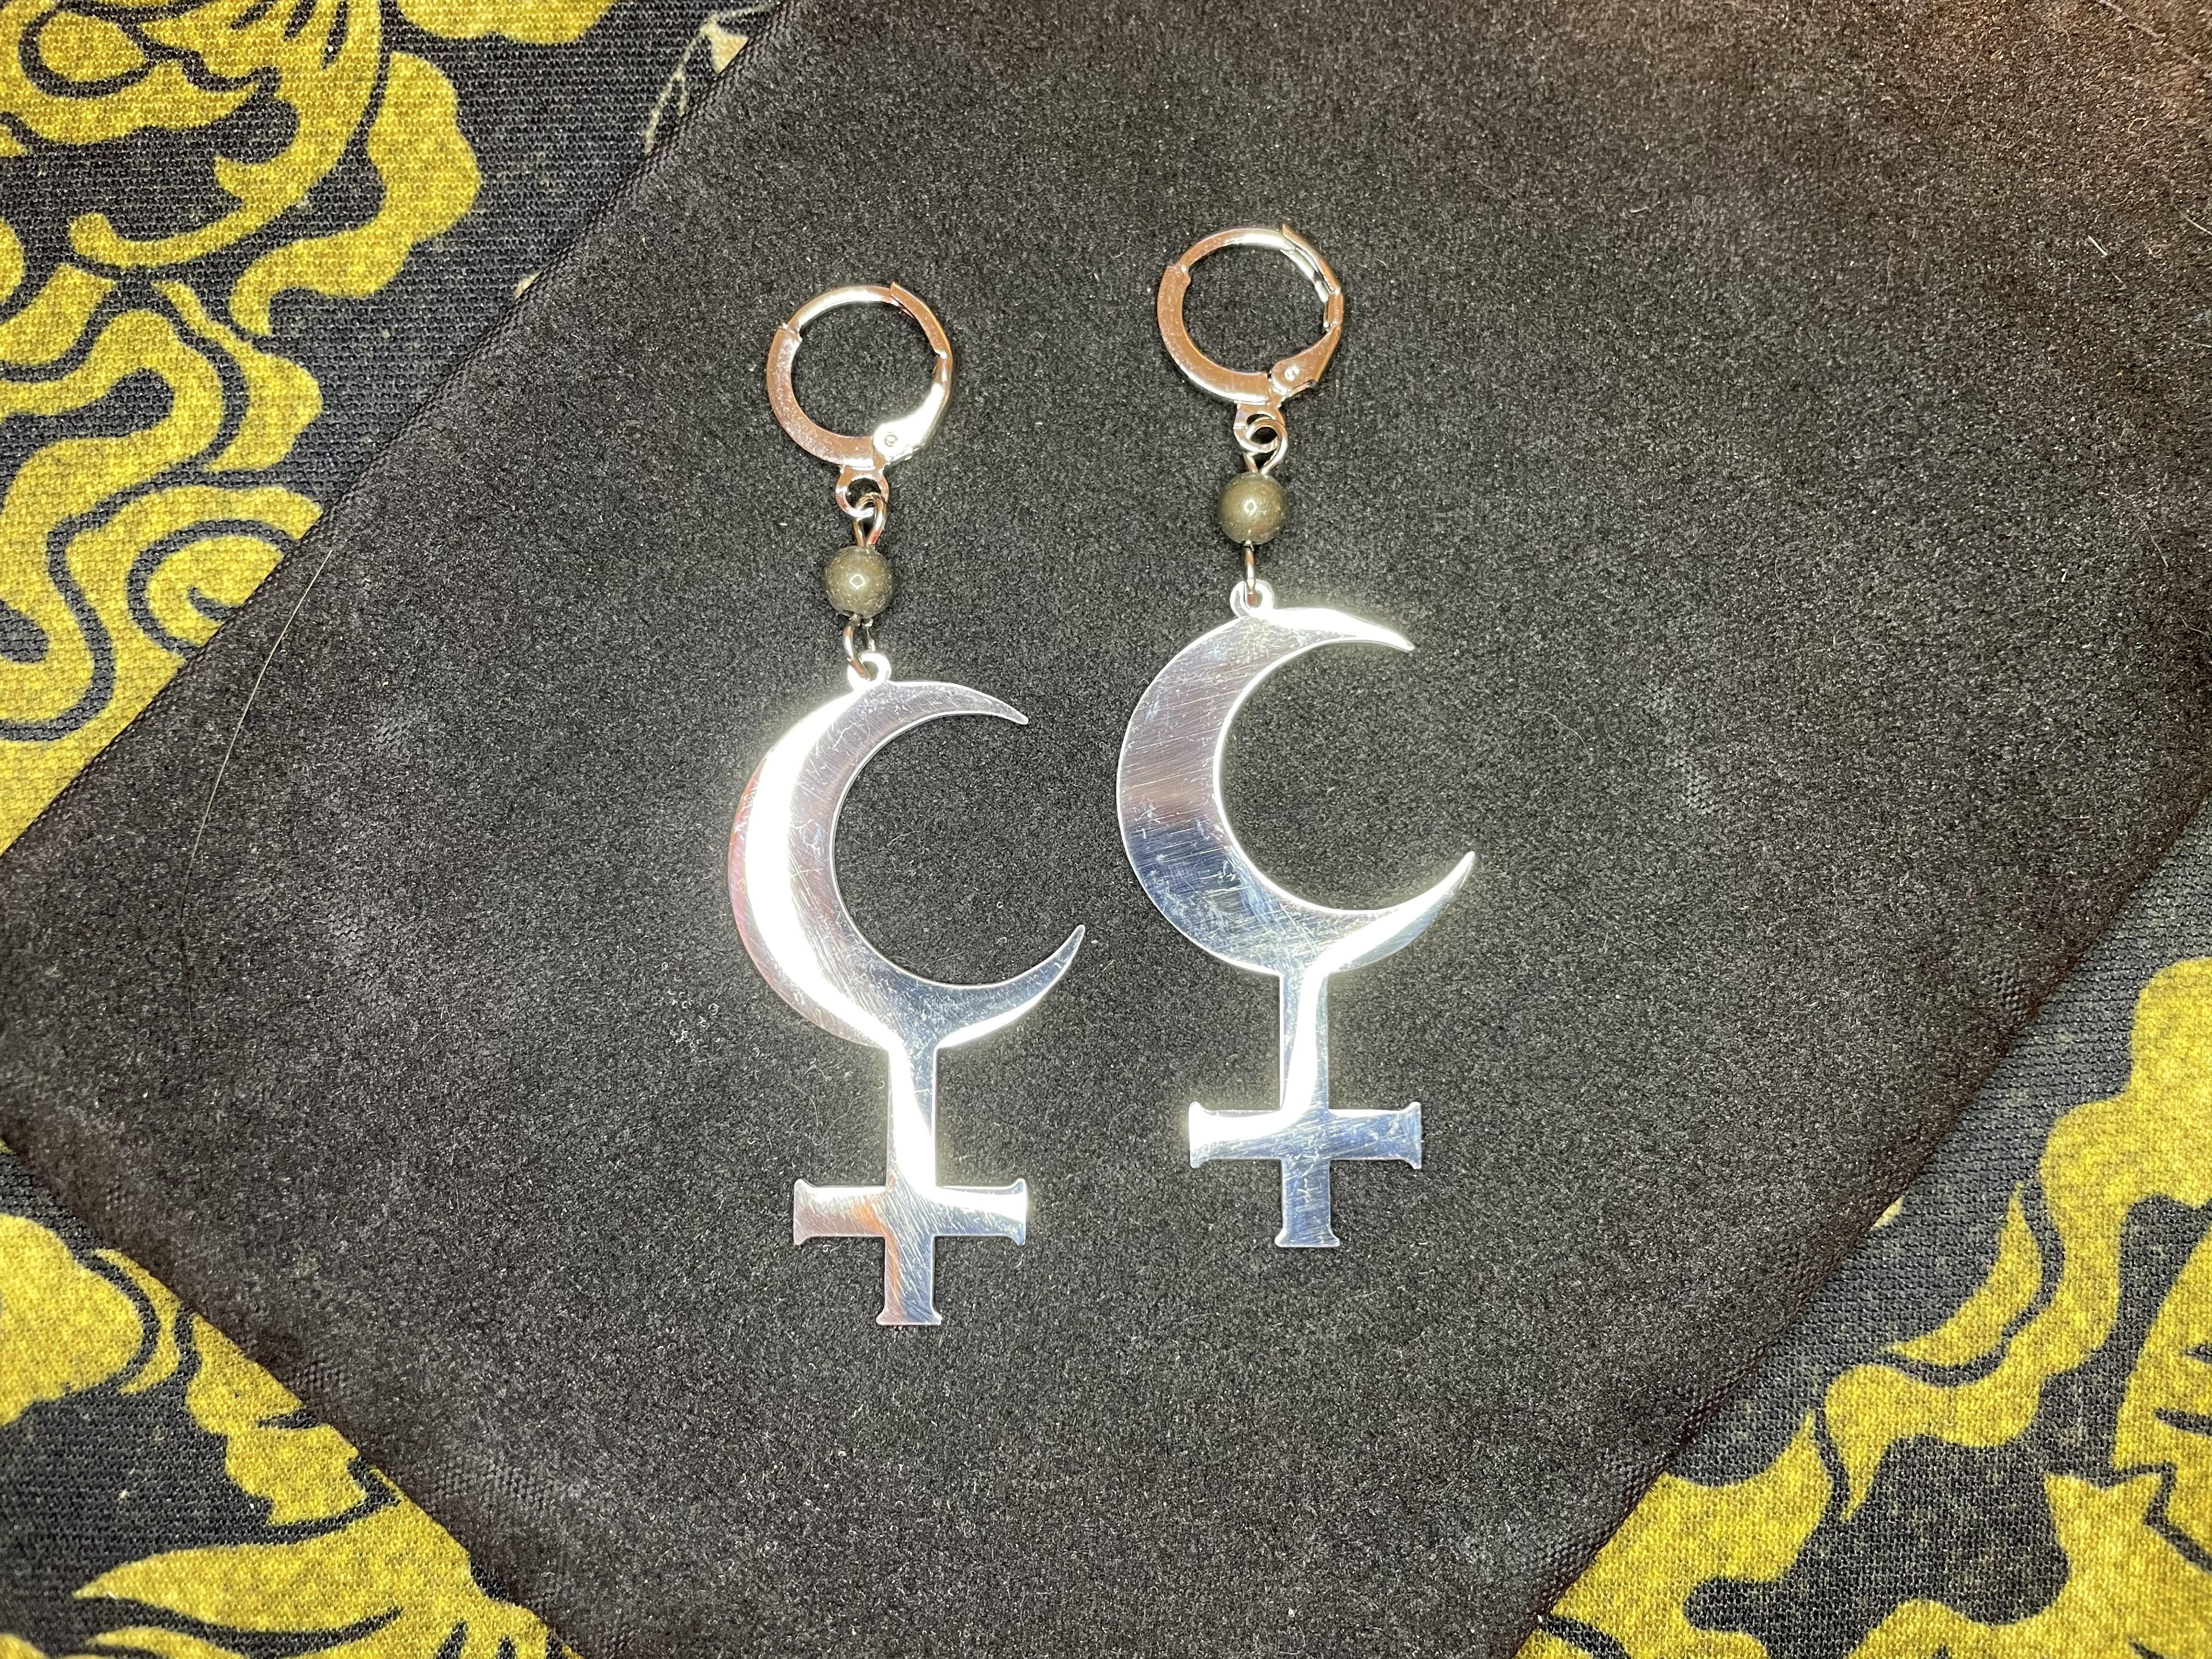 Lilith Symbol Crescent Moon Inverted Upside Down Cross Stainless Steel Earrings Gothic Pagan Satanic Wiccan Occult Darkness Jewelry Silver